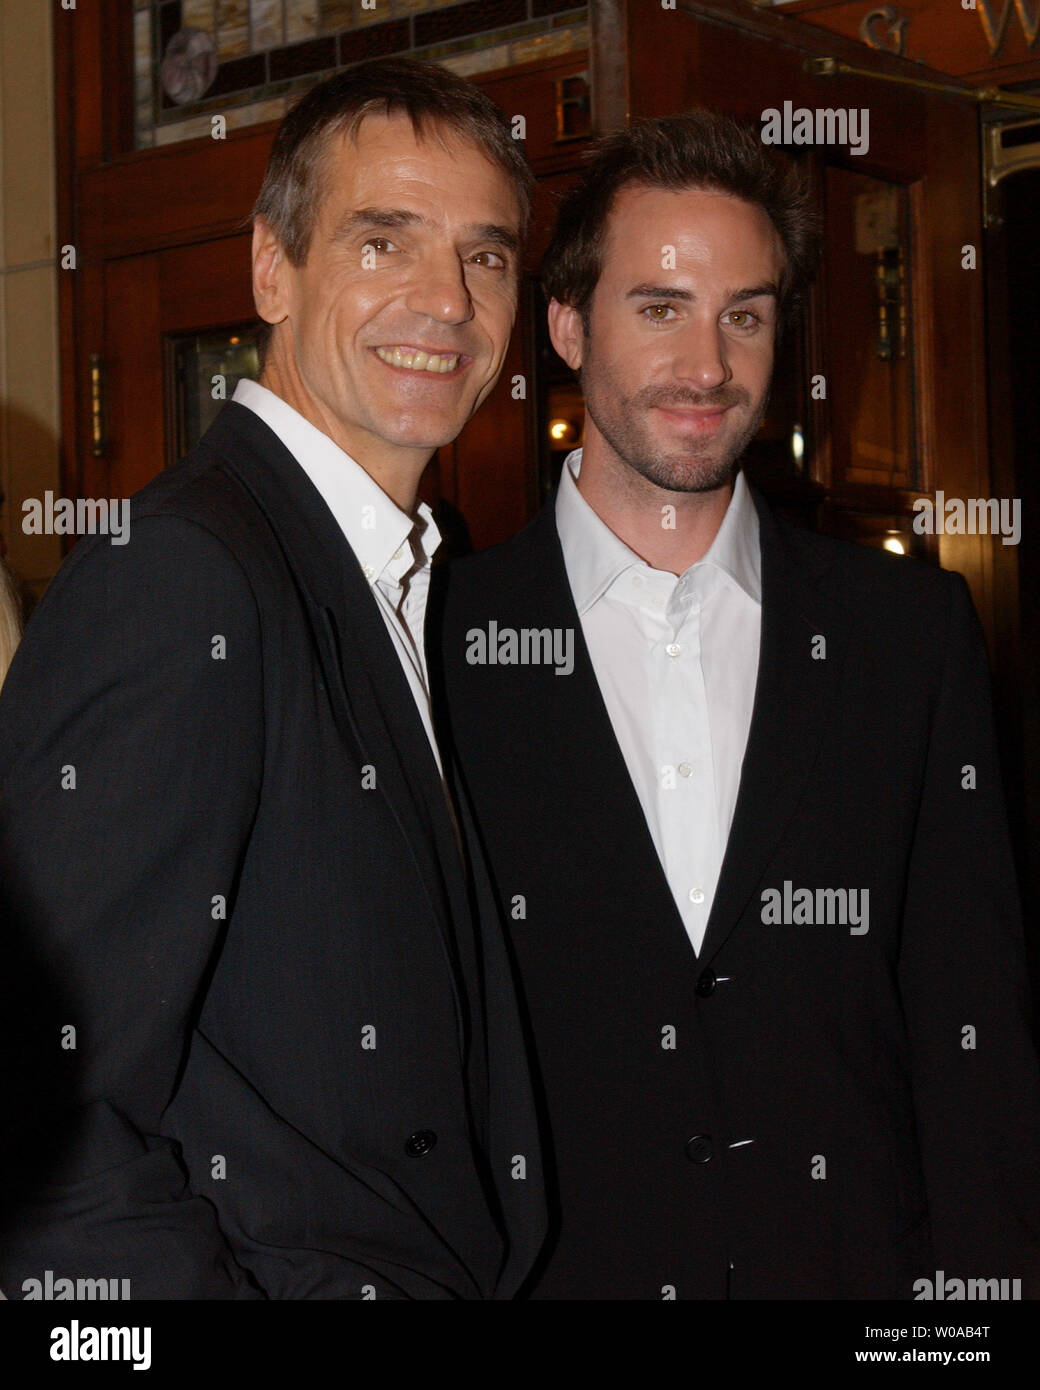 Joseph Fiennes(right) and Jeremy Irons pose for photographers on the red carpet before the Toronto International Film Festival screening of 'The Merchant of Venice' at the Elgin Theater September 11, 2004  in Toronto, Canada. (UPI Photo/Christine Chew) Stock Photo